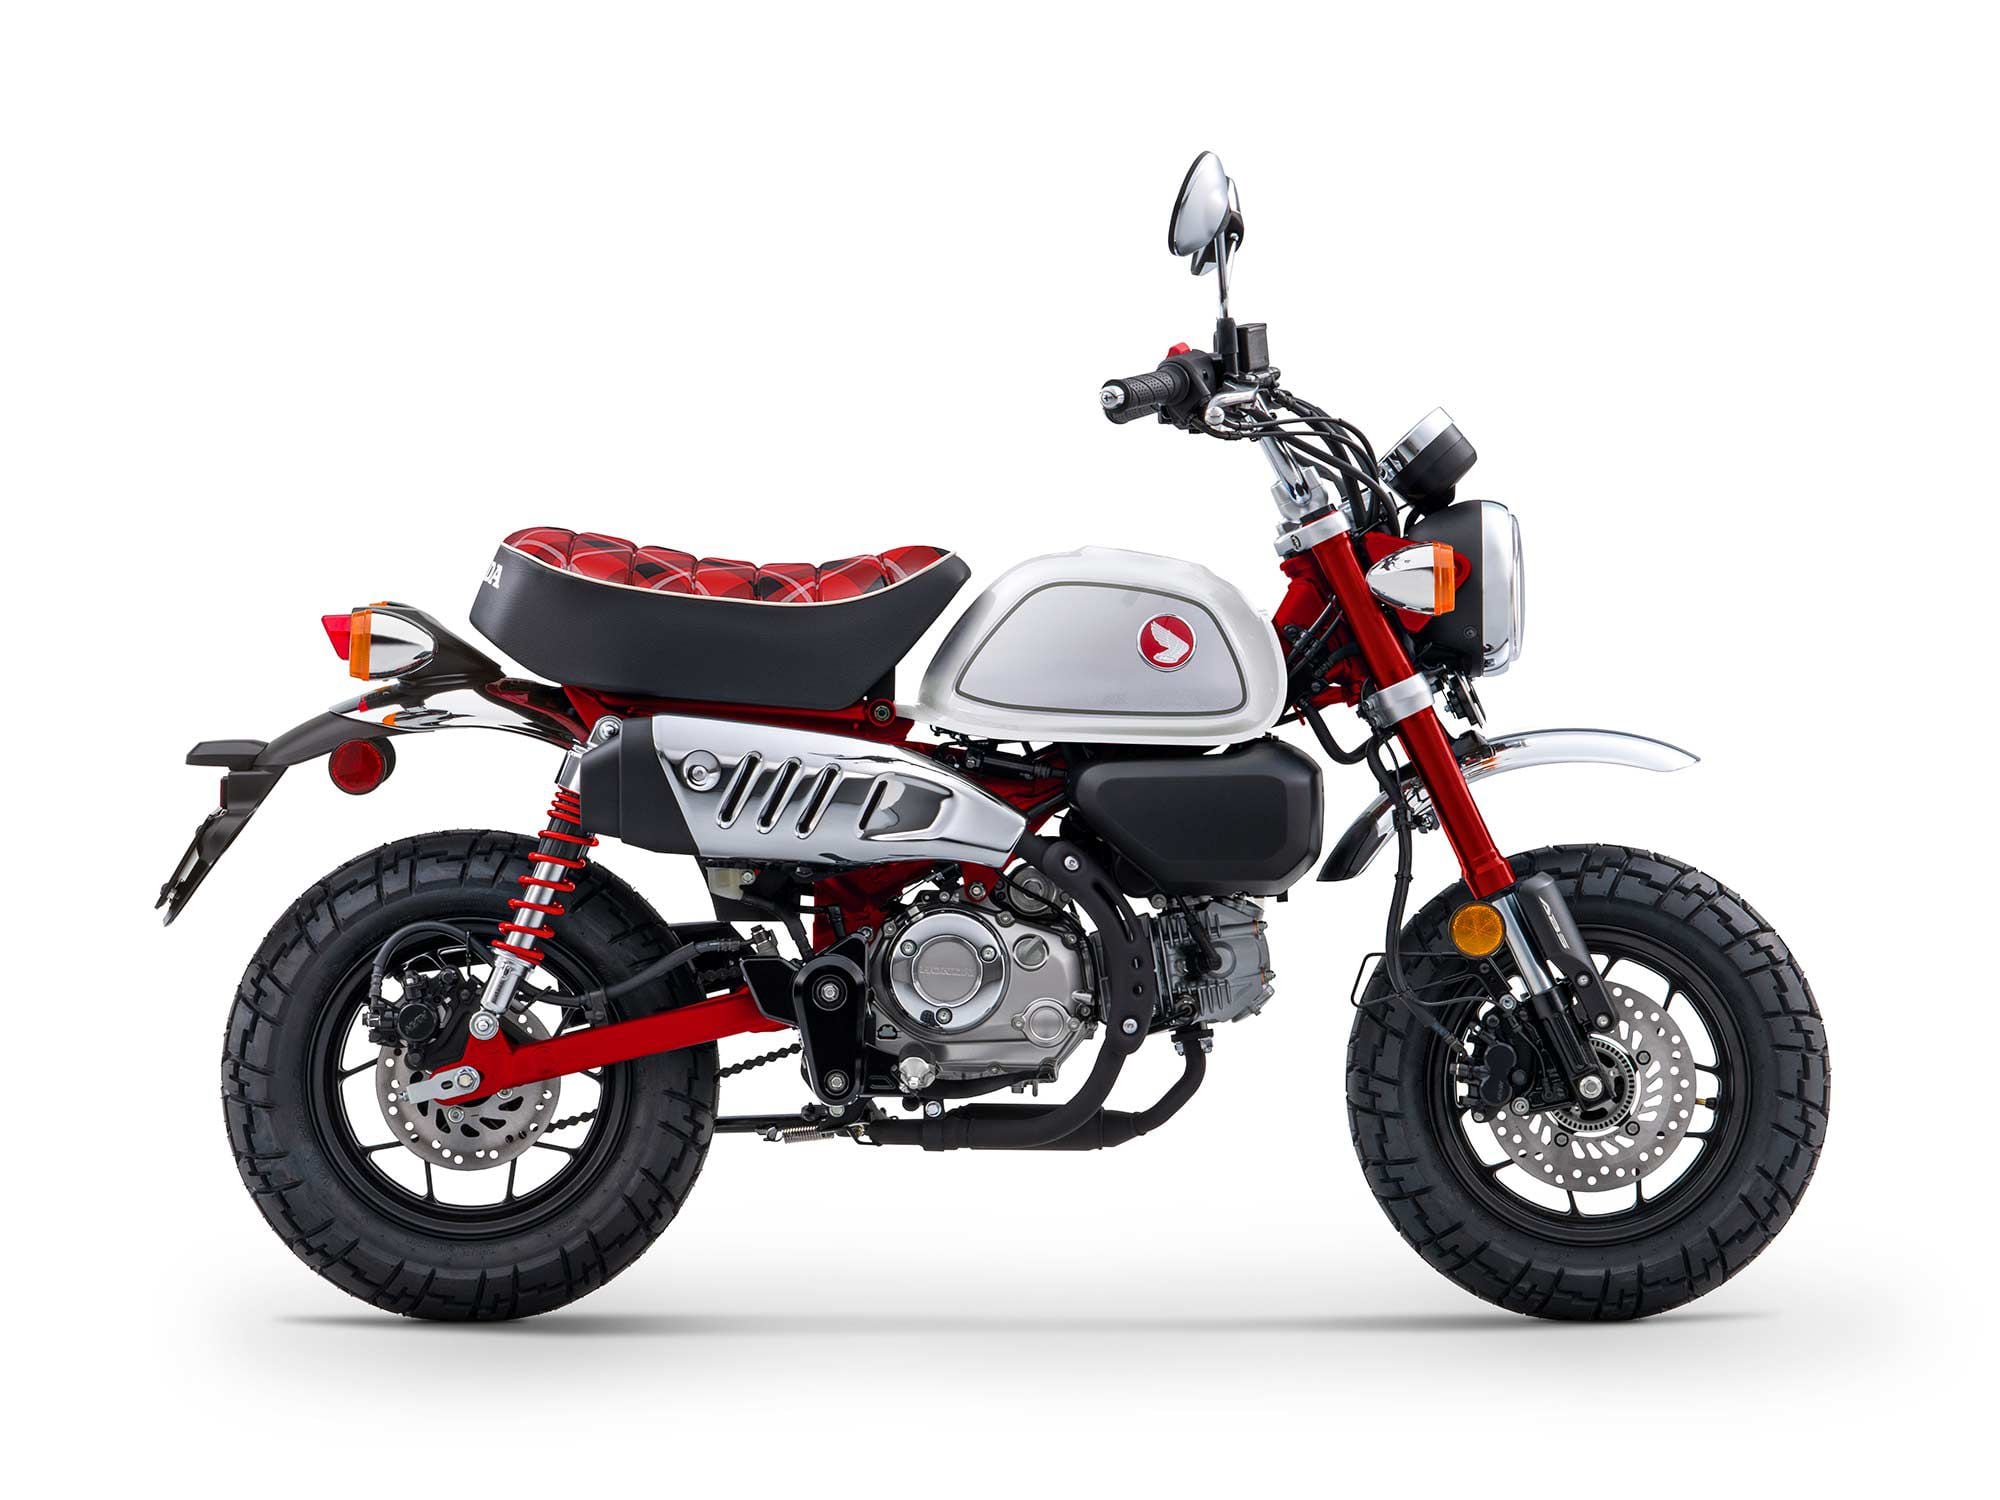 If looking at the Honda Monkey doesn’t put a smile on your face, then riding one will. This is Honda celebrating its minibike roots, but making sure the experience is as you’d expect from a modern motorcycle.